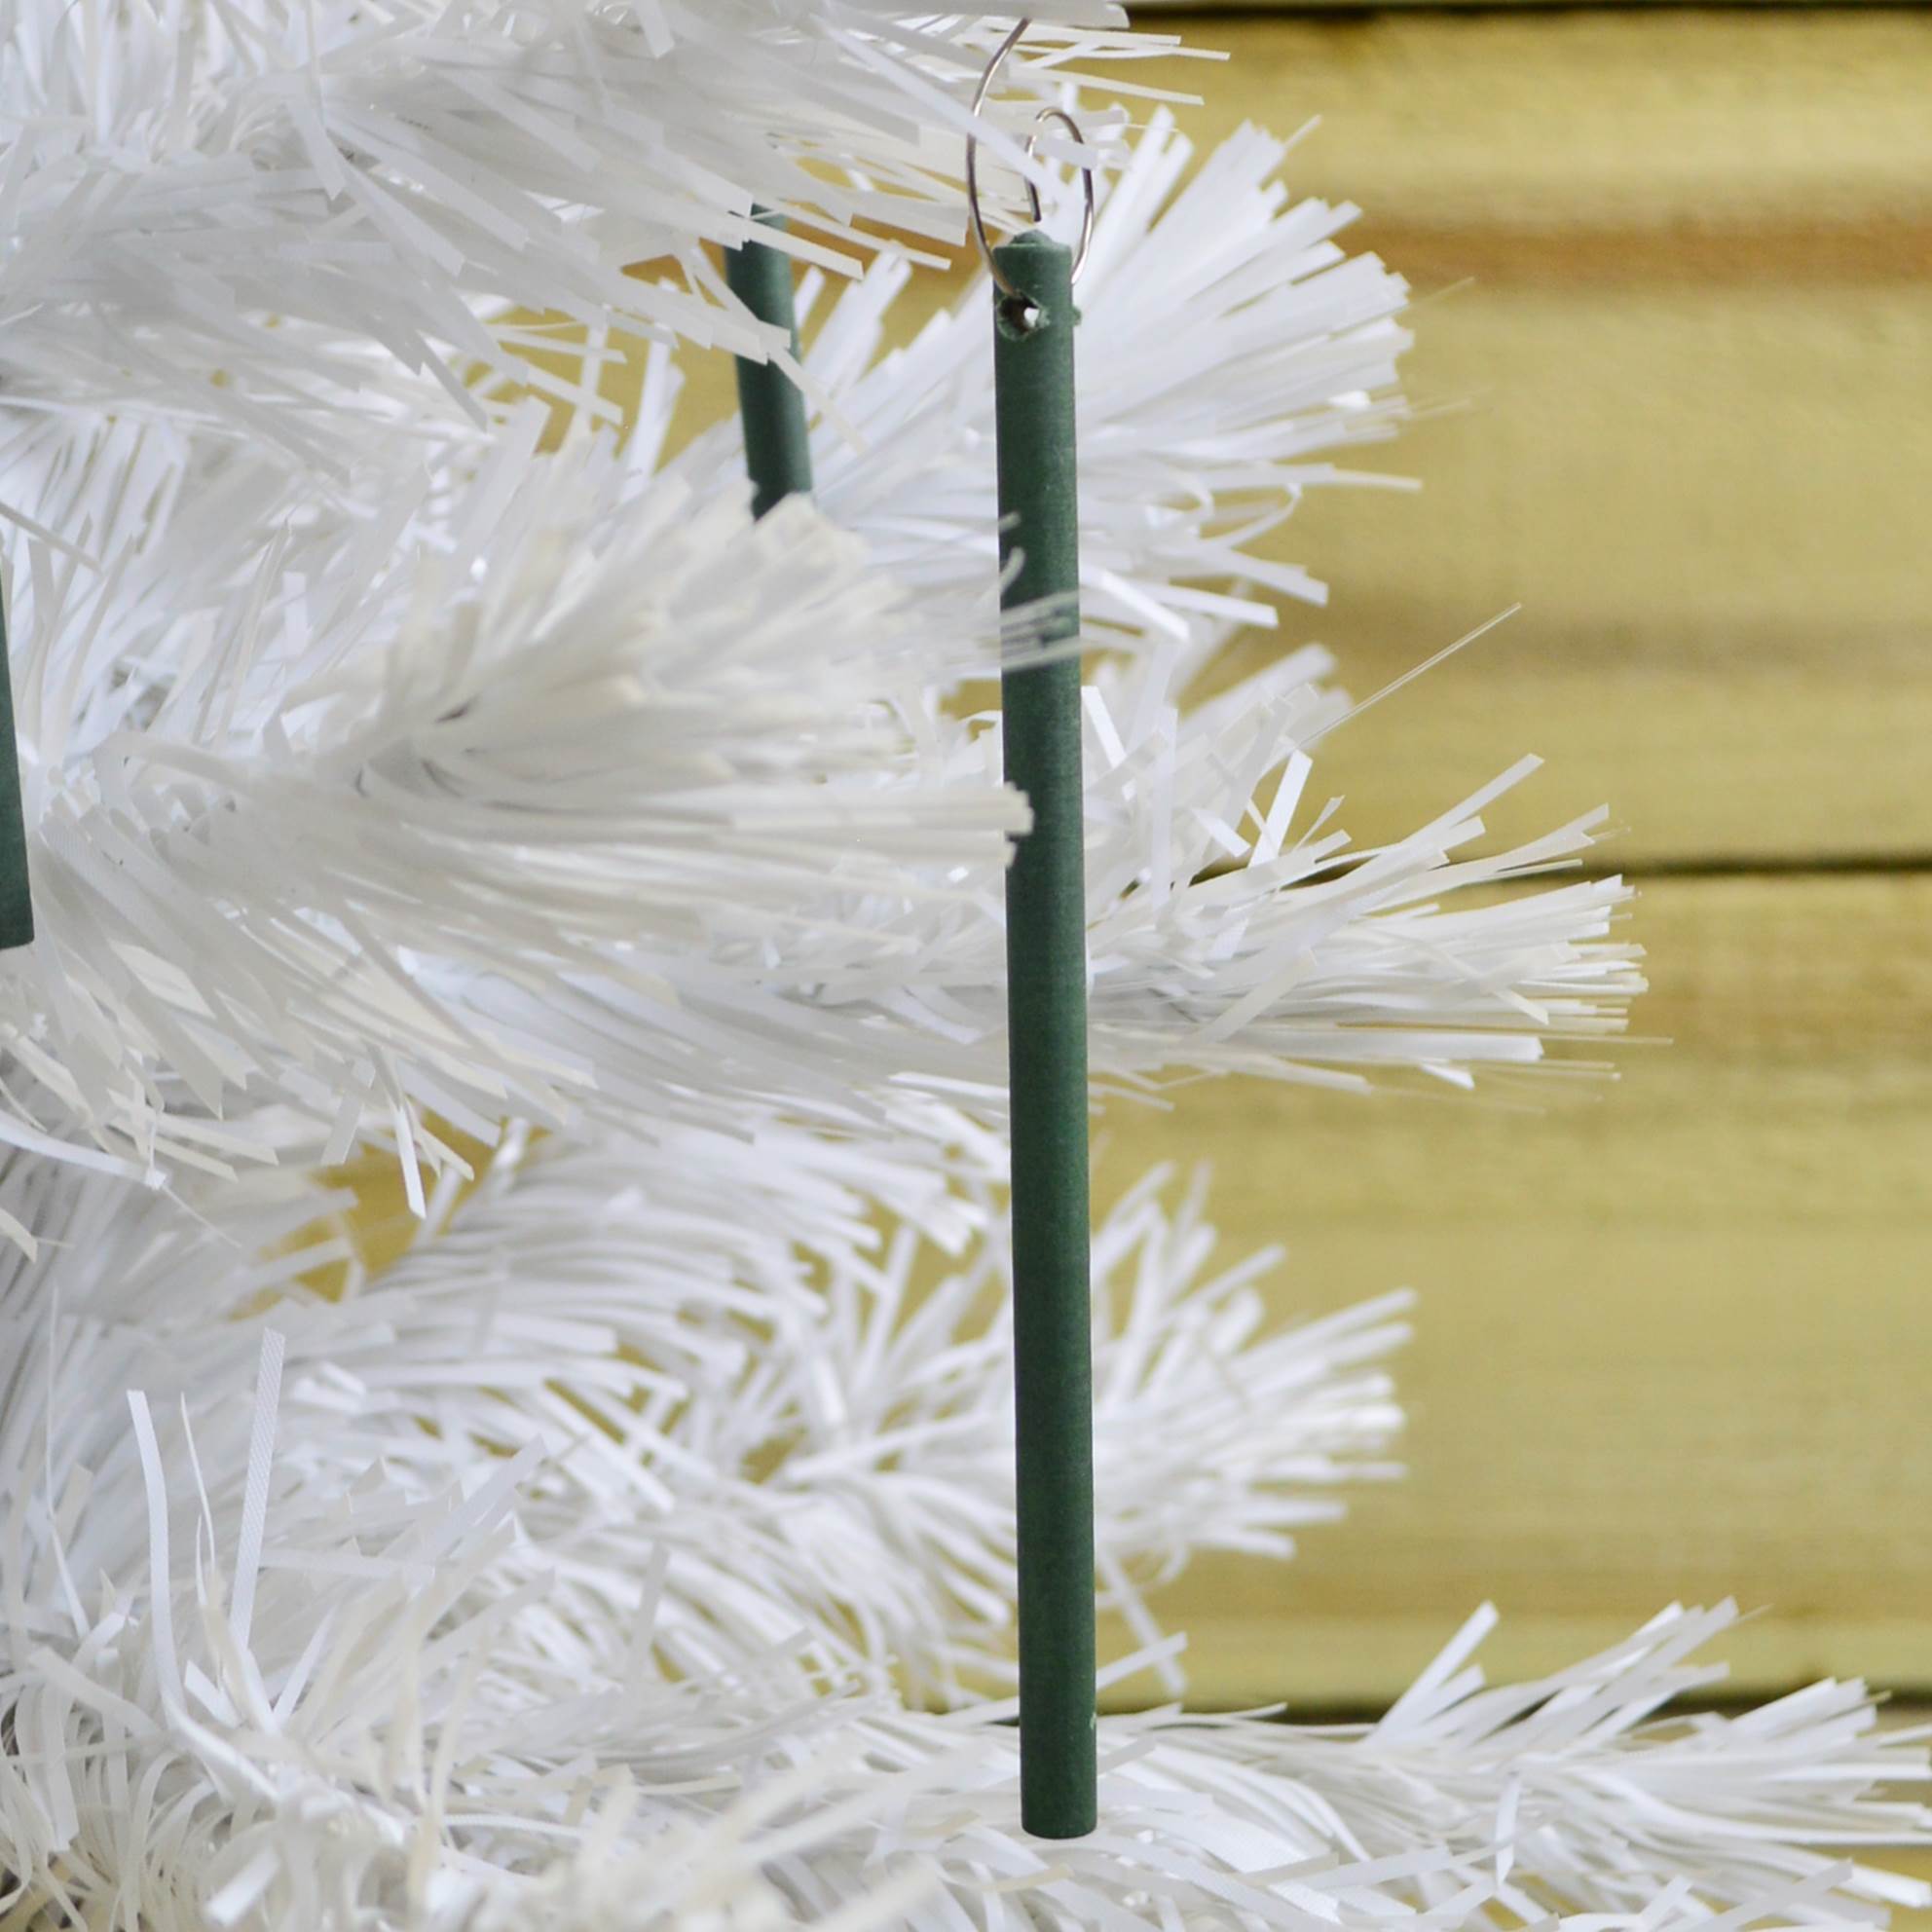 2 PACKS of 6 Scentsicles Scented Hanging Ornaments Sticks - White Winter Fir